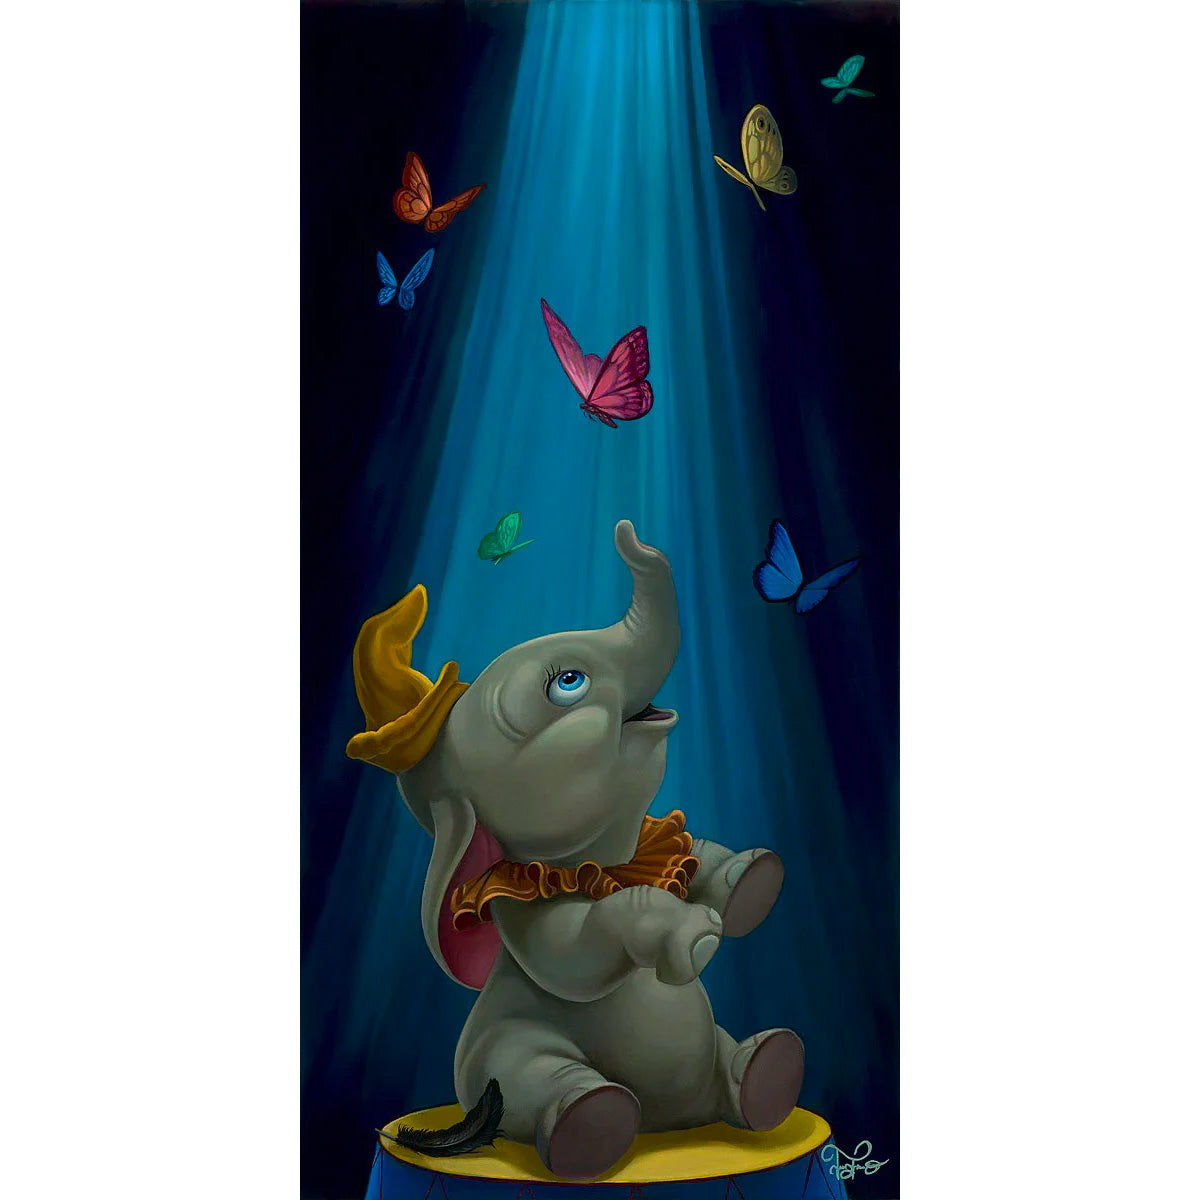 Jared Franco Disney "Dream to Fly" Limited Edition Canvas Giclee